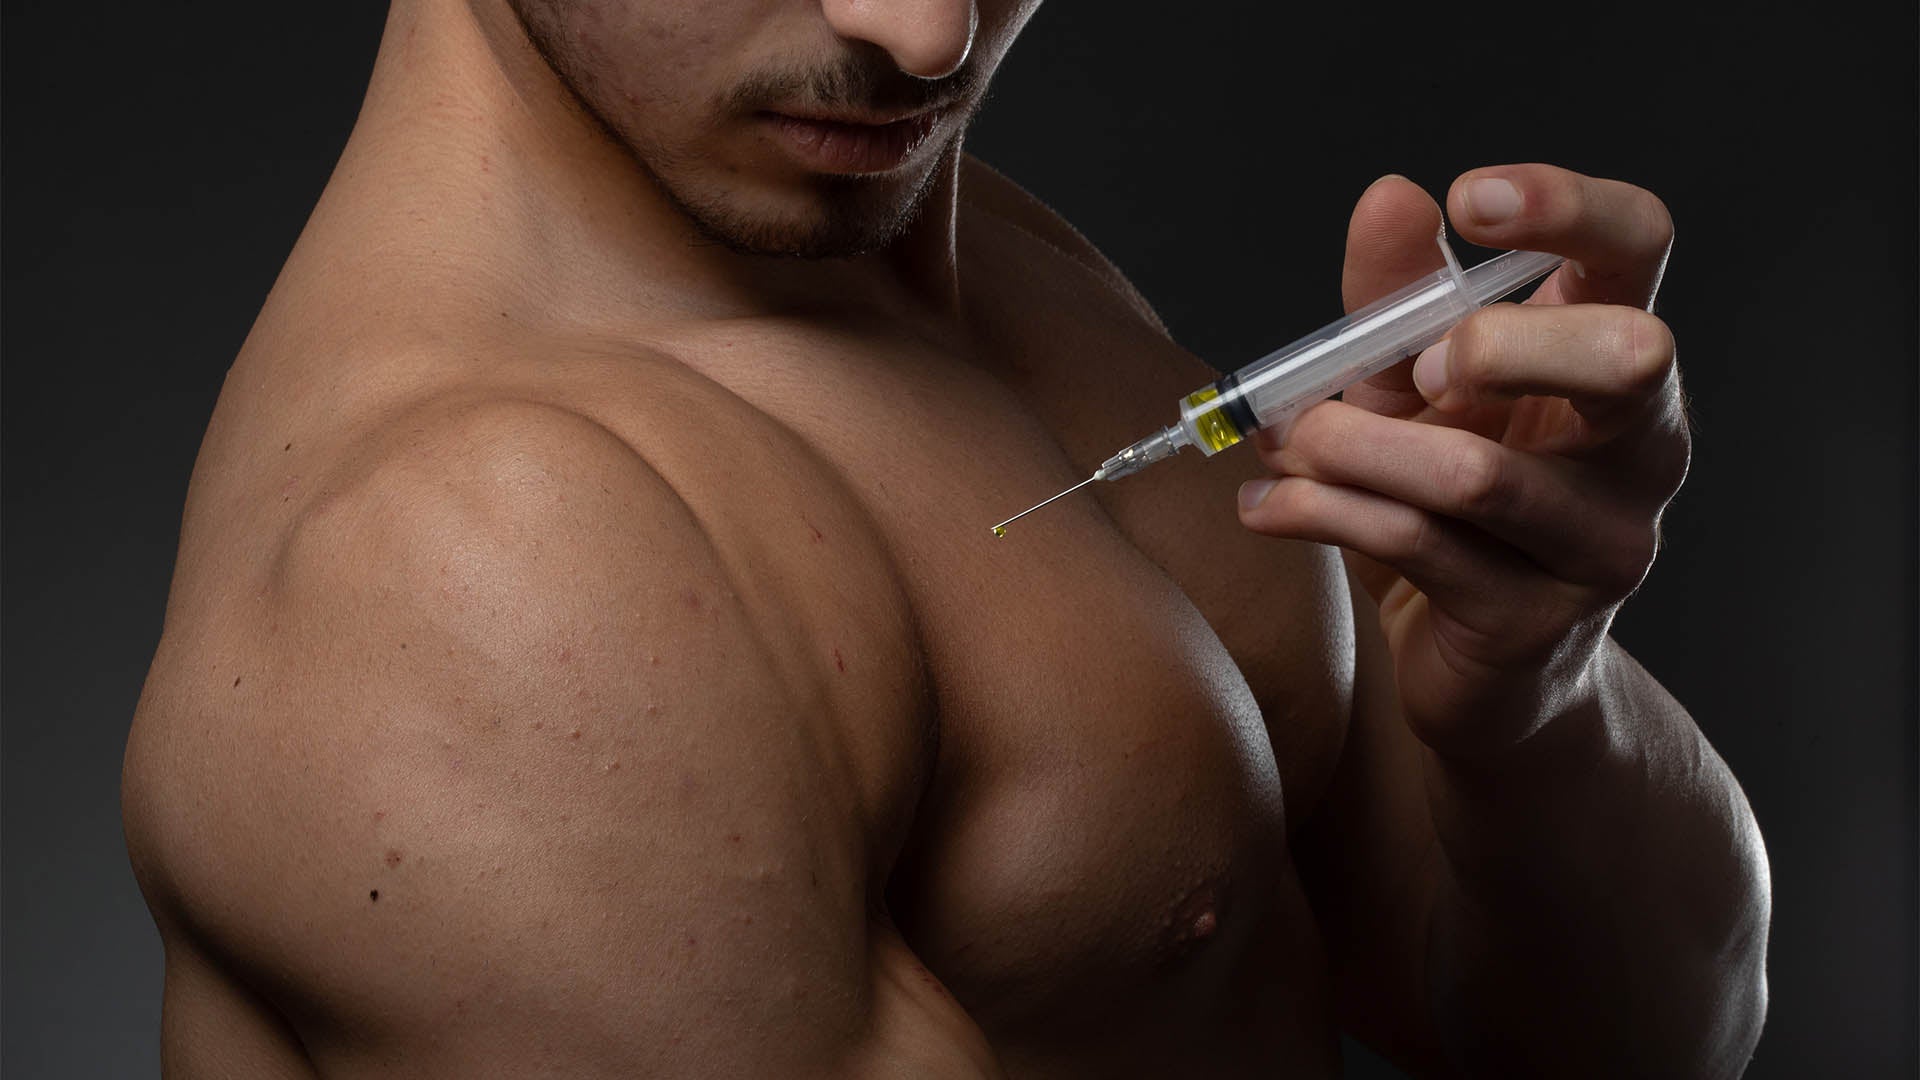 What are anabolic steroids